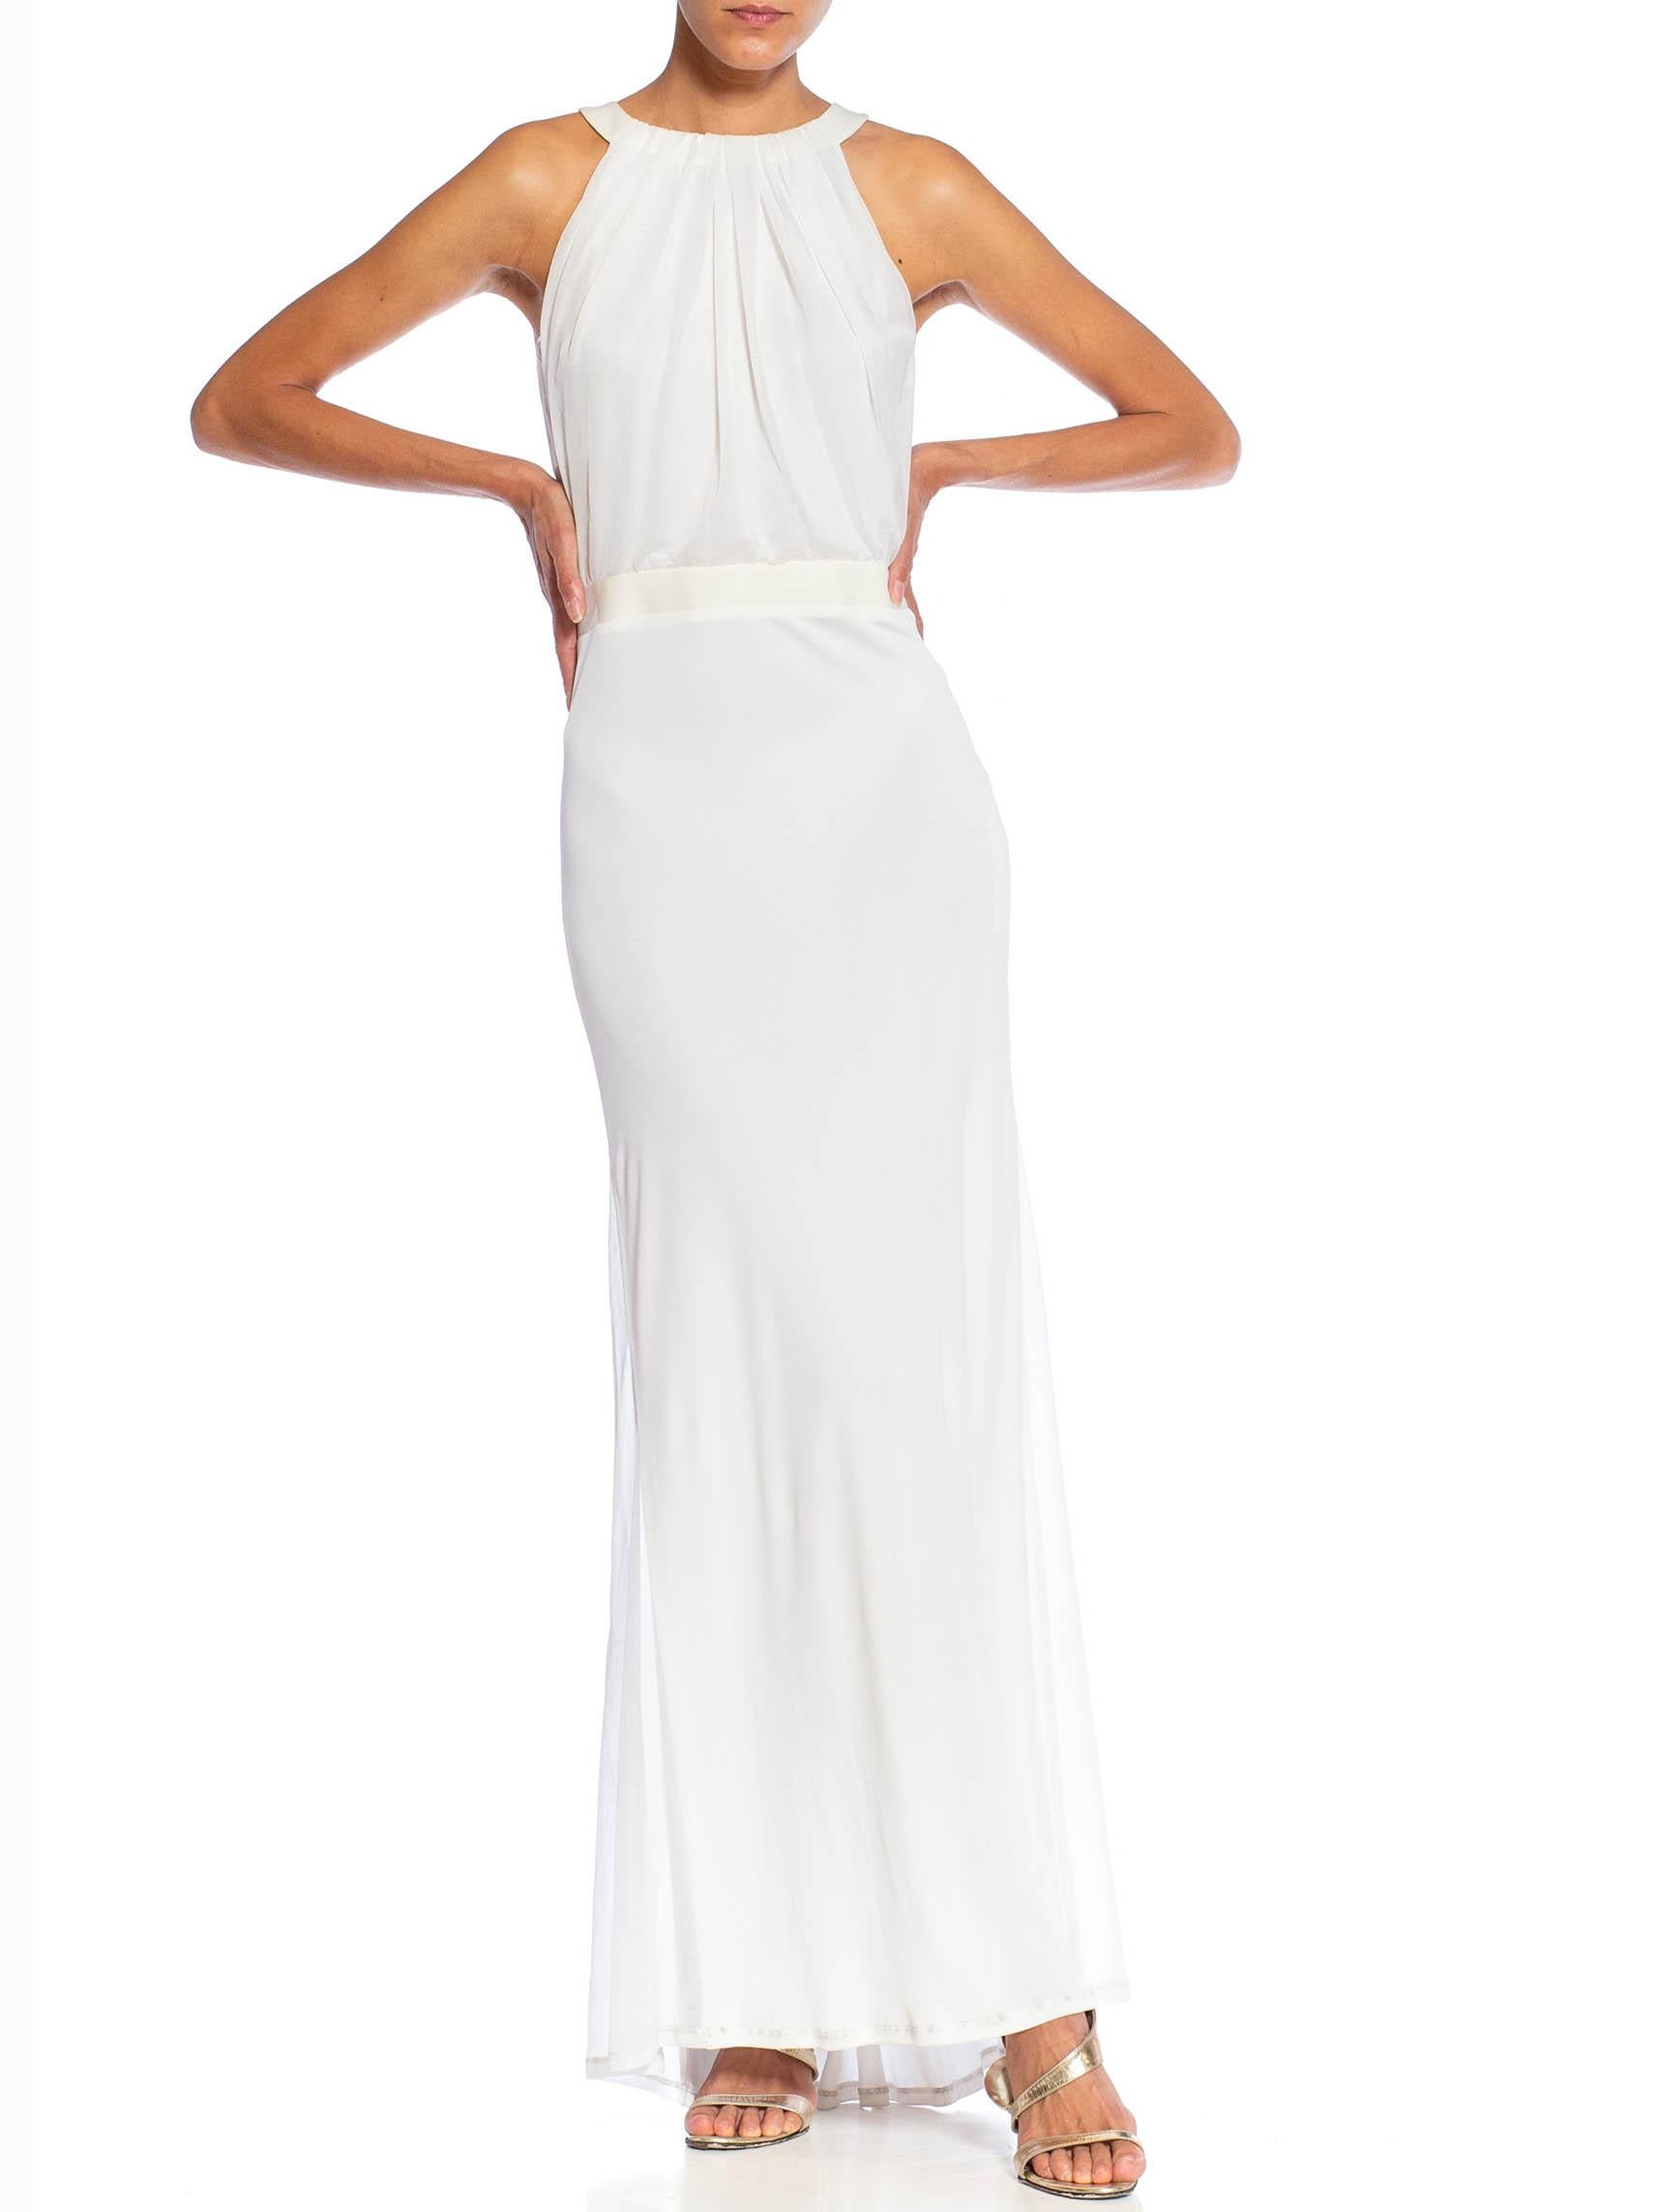 Women's 2000S EMILIO PUCCI White Viscose Blend Jersey Gown For Sale